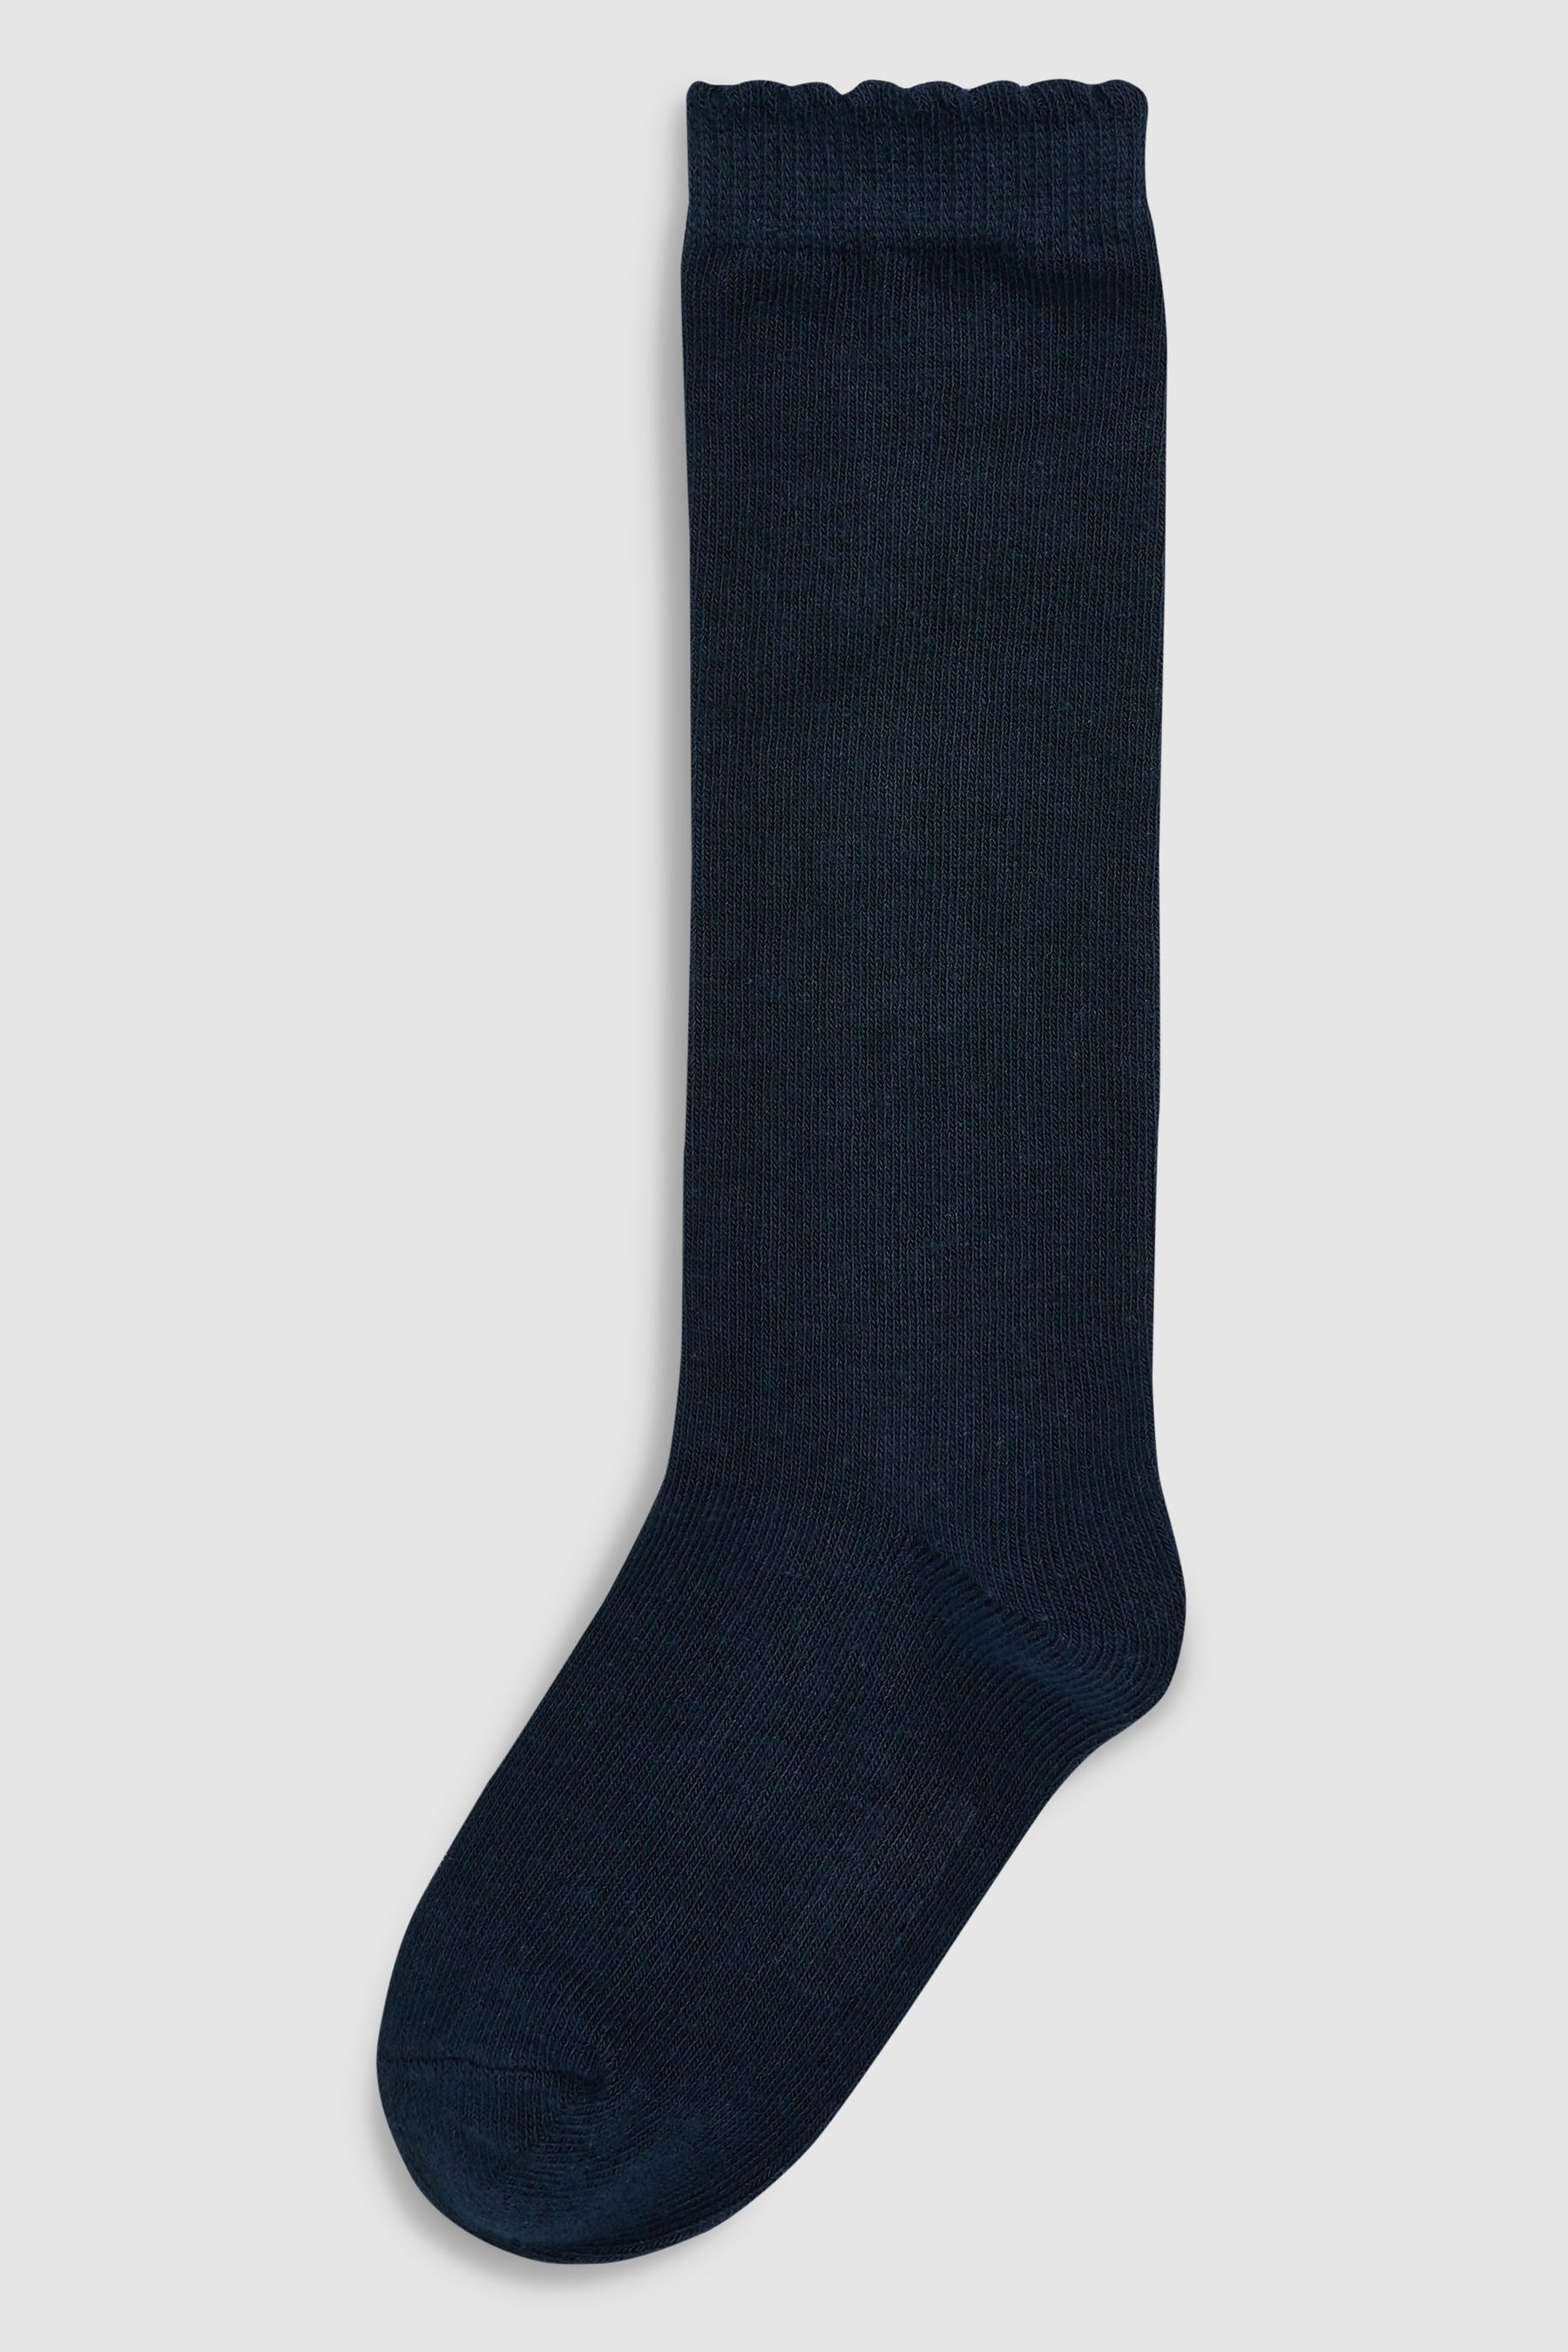 Buy Navy Grey 3 Pack Cotton Rich Knee High School Socks from the Next ...